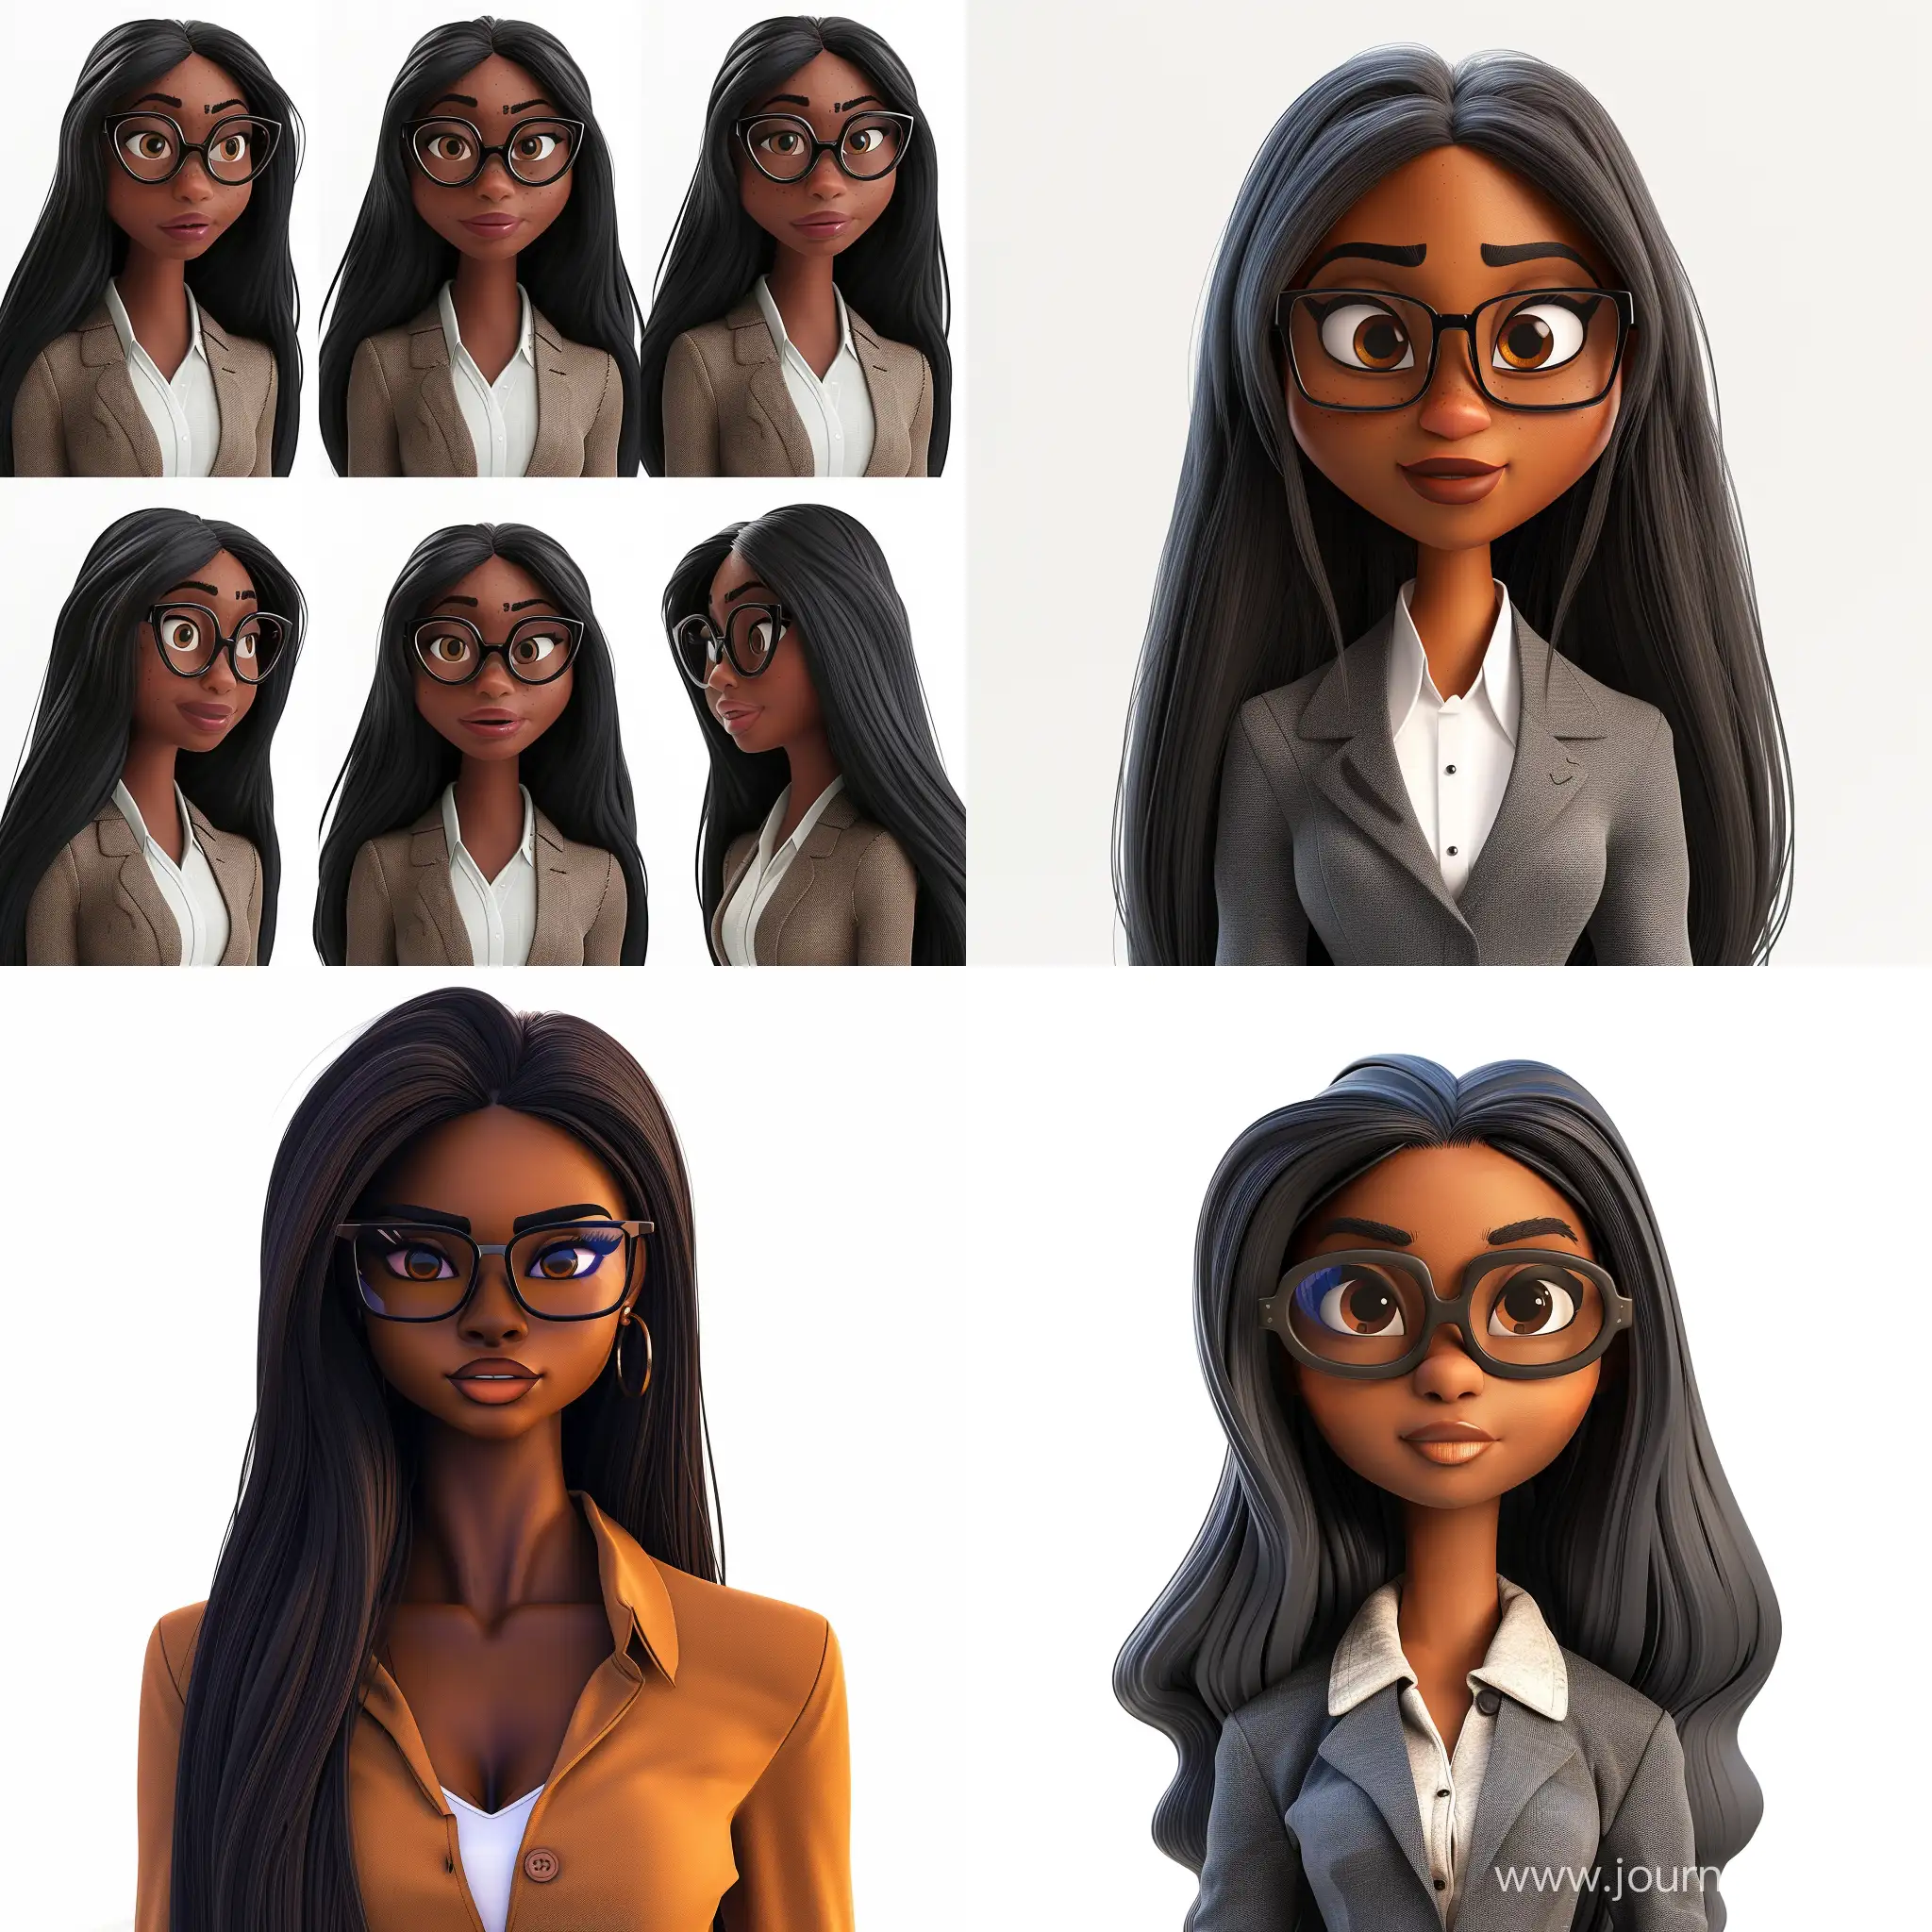 Professional-Black-Woman-with-Striking-Long-Hair-and-Glasses-in-Various-Expressions